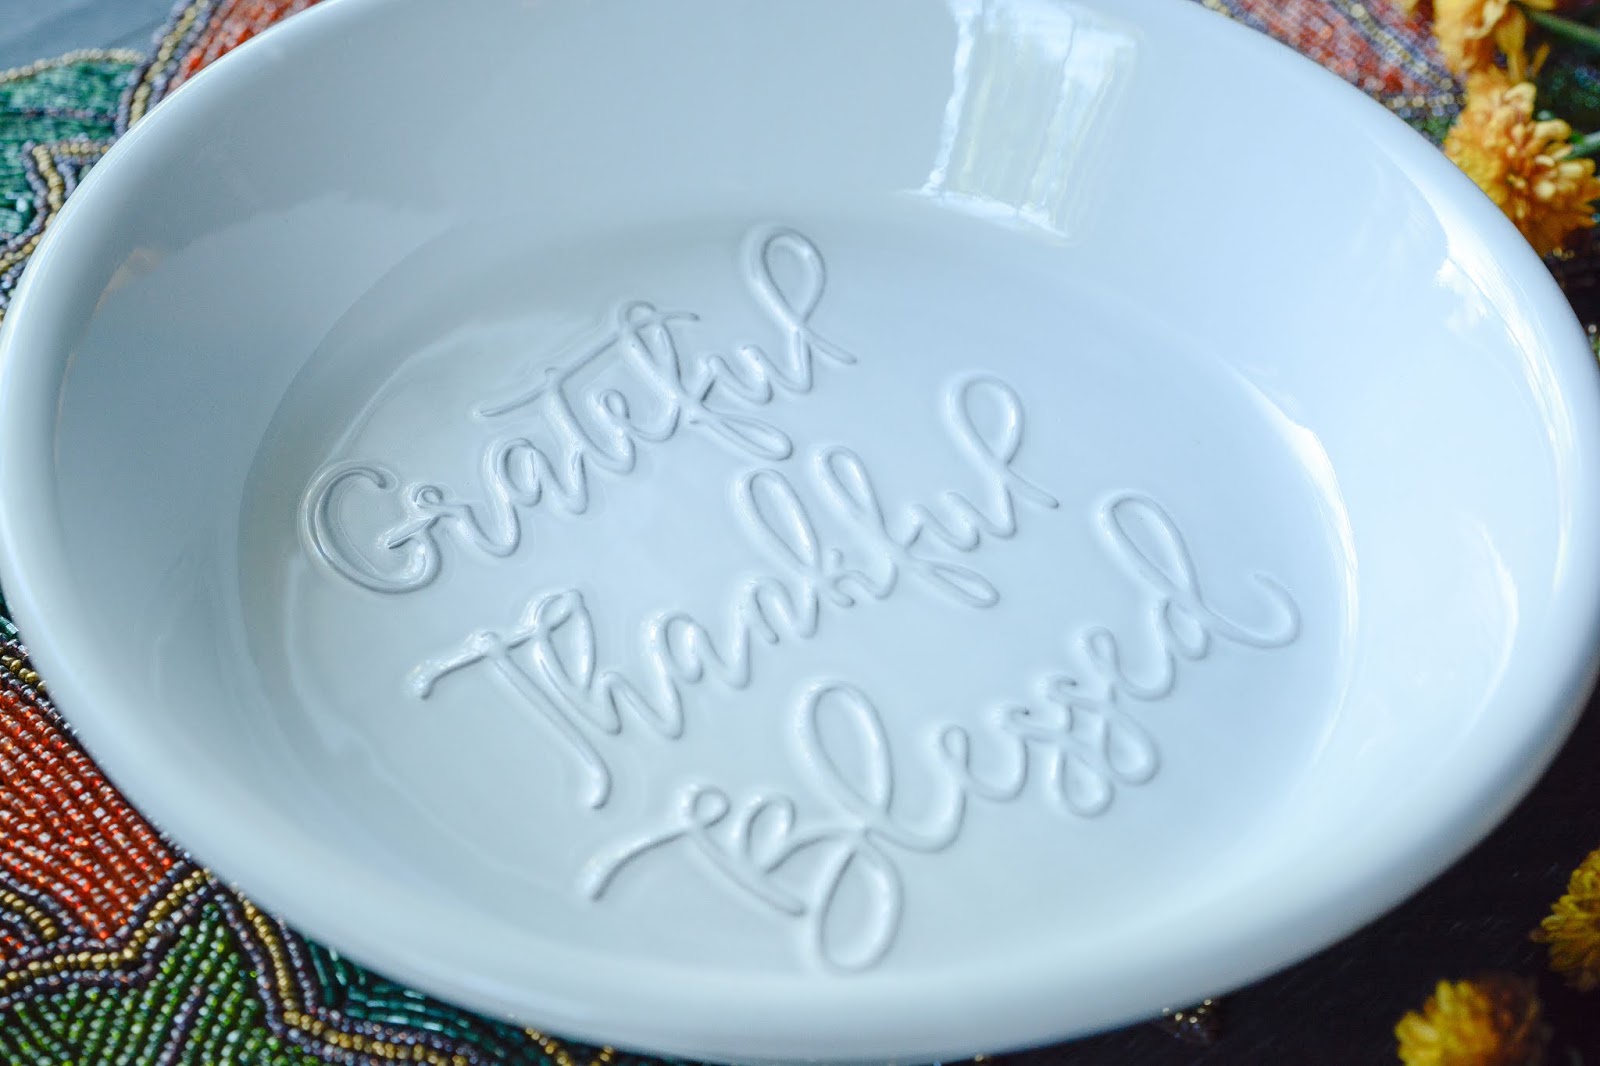 Bountiful Blessings Pie Plate